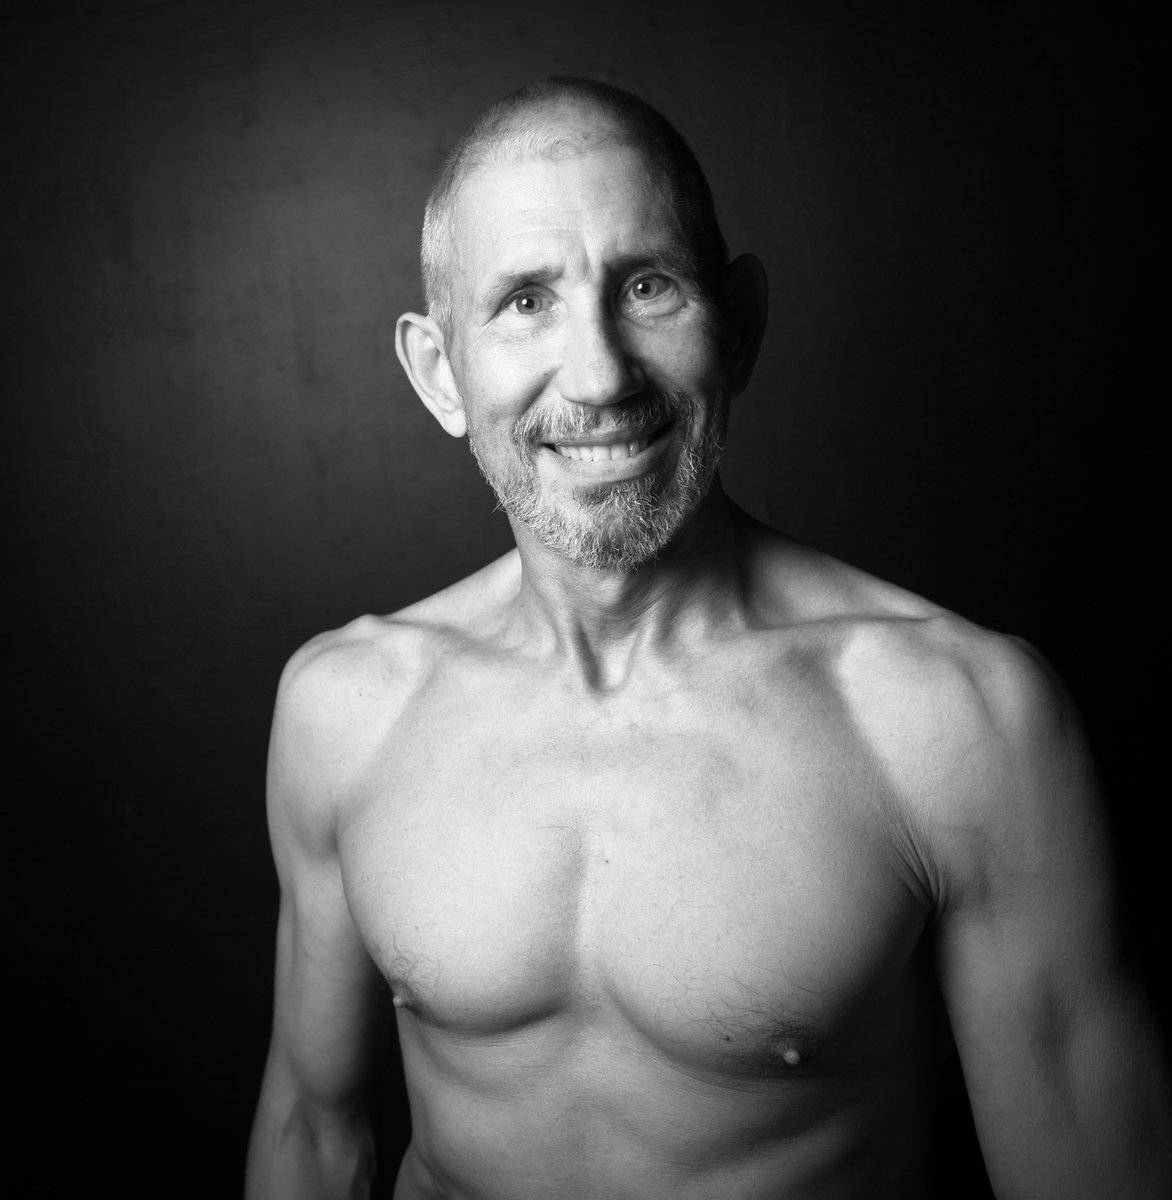 @Ed_UKation My actual Grindr profile pic. Age 61. Less is more.